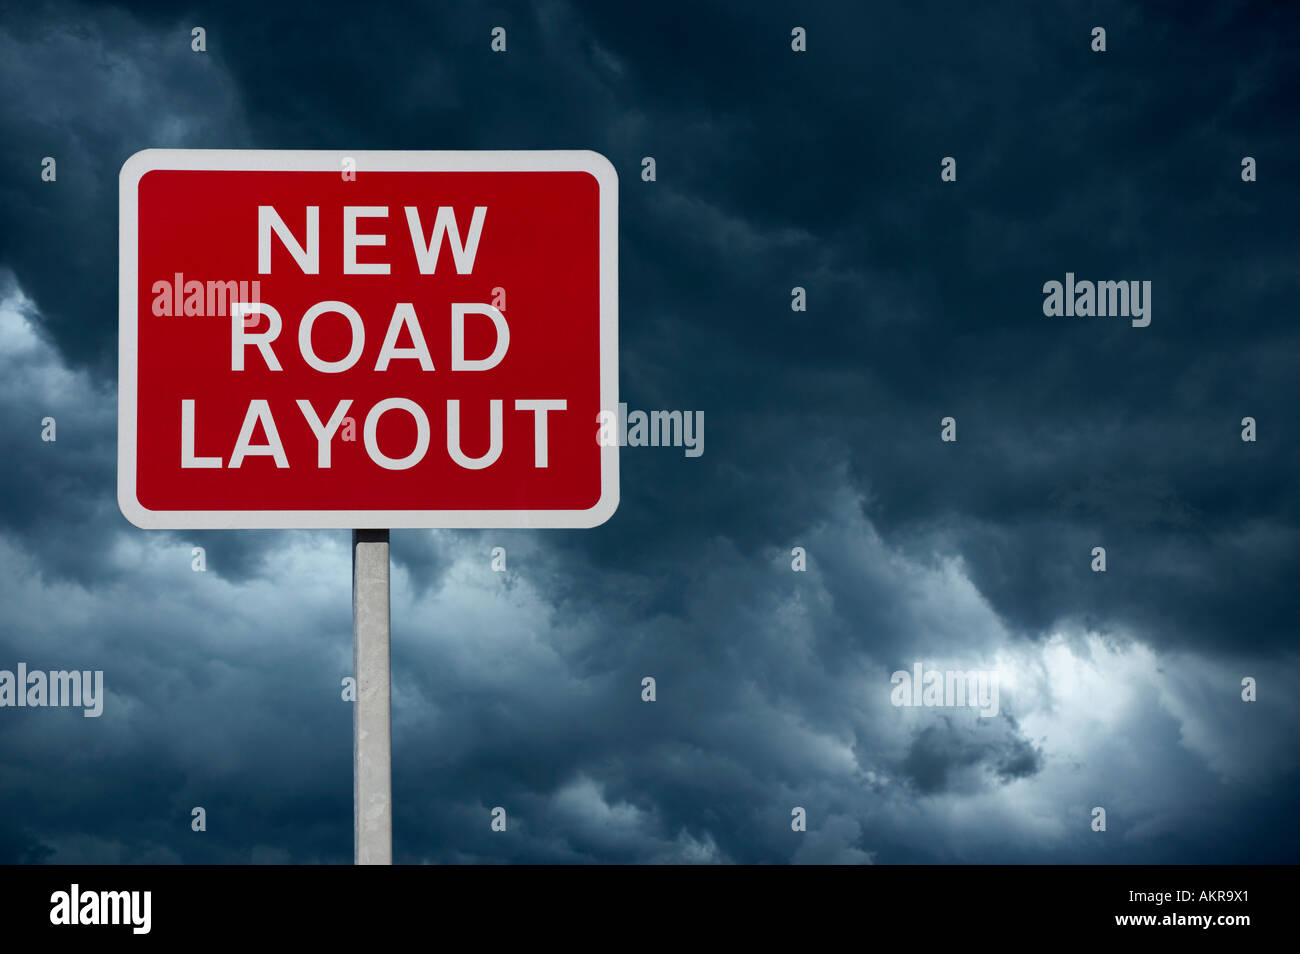 RED NEW ROAD LAYOUT WARNING SIGN WITH BLUE STORMY SKY AND CLOUDS IN BACKGROUND Stock Photo